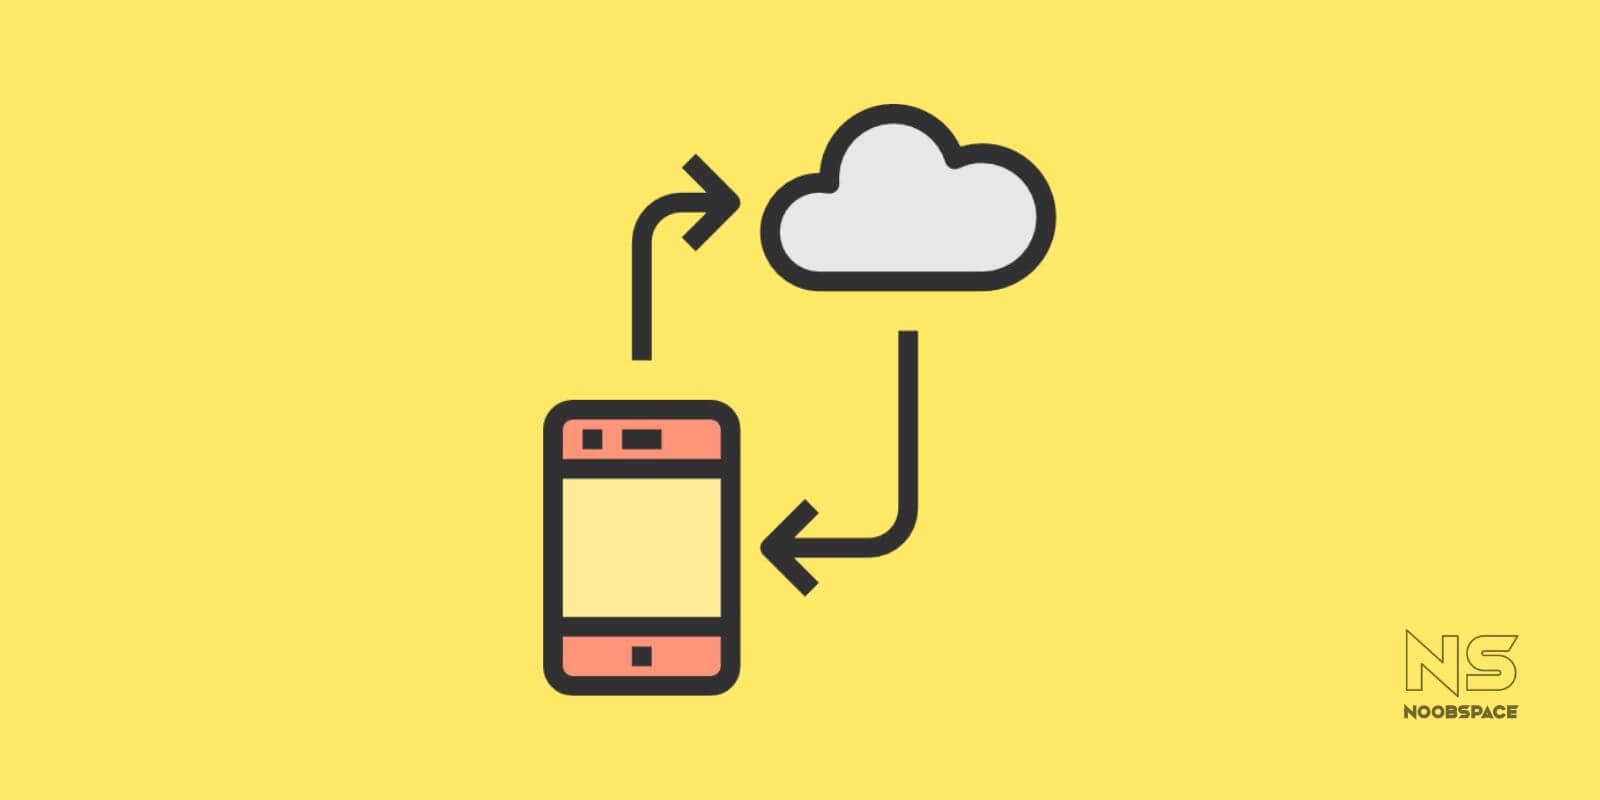 An illustration of a cloud and a smartphone in sync